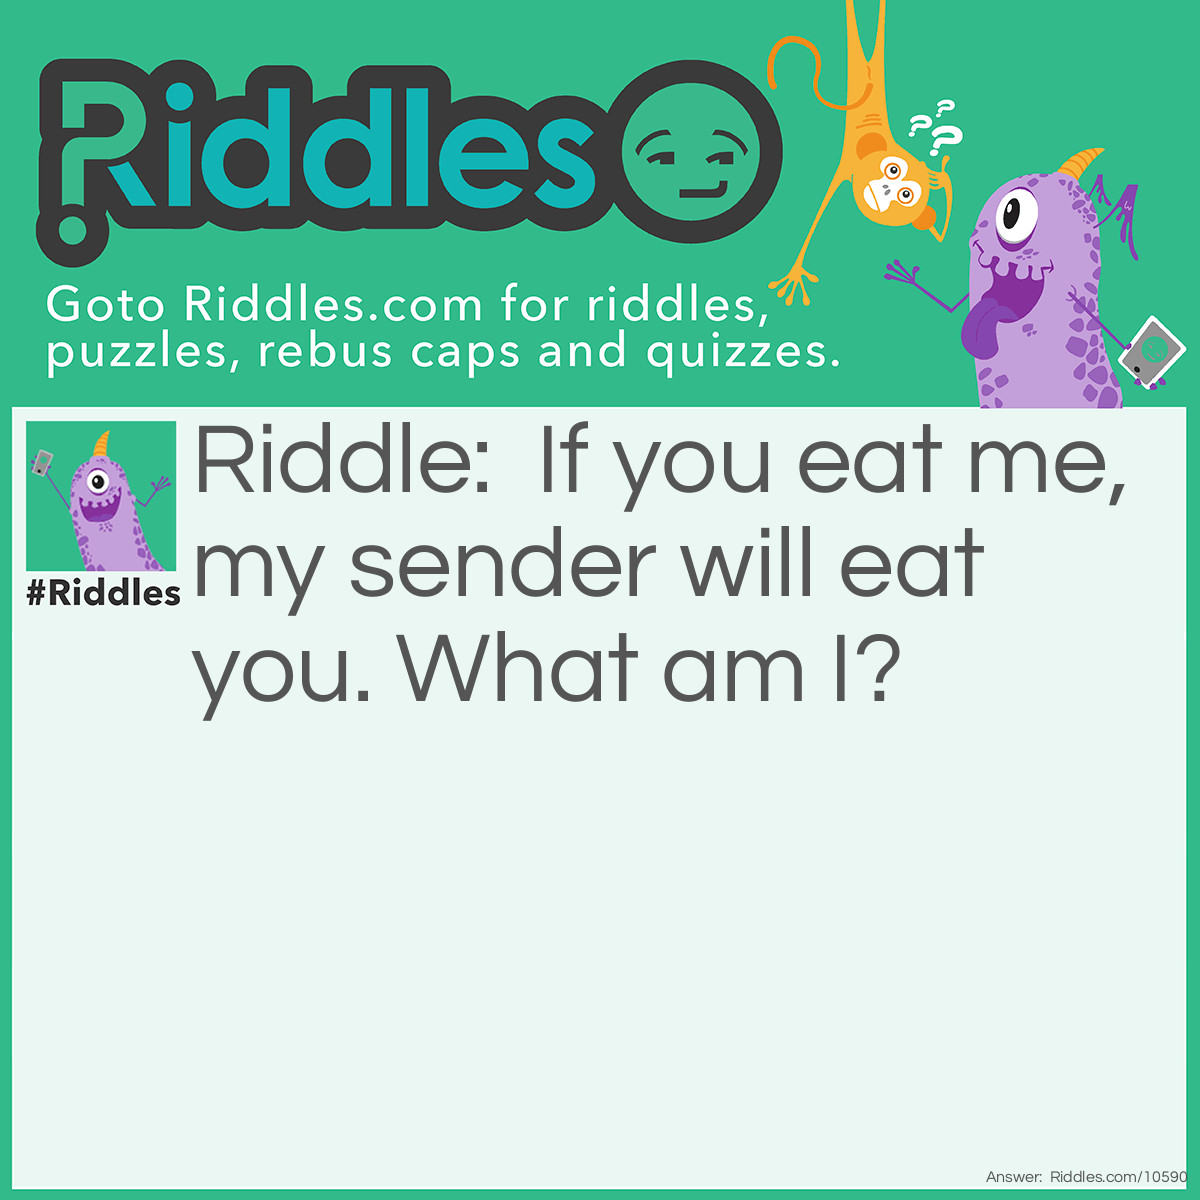 Riddle: If you eat me, my sender will eat you. What am I? Answer: Fishhook.